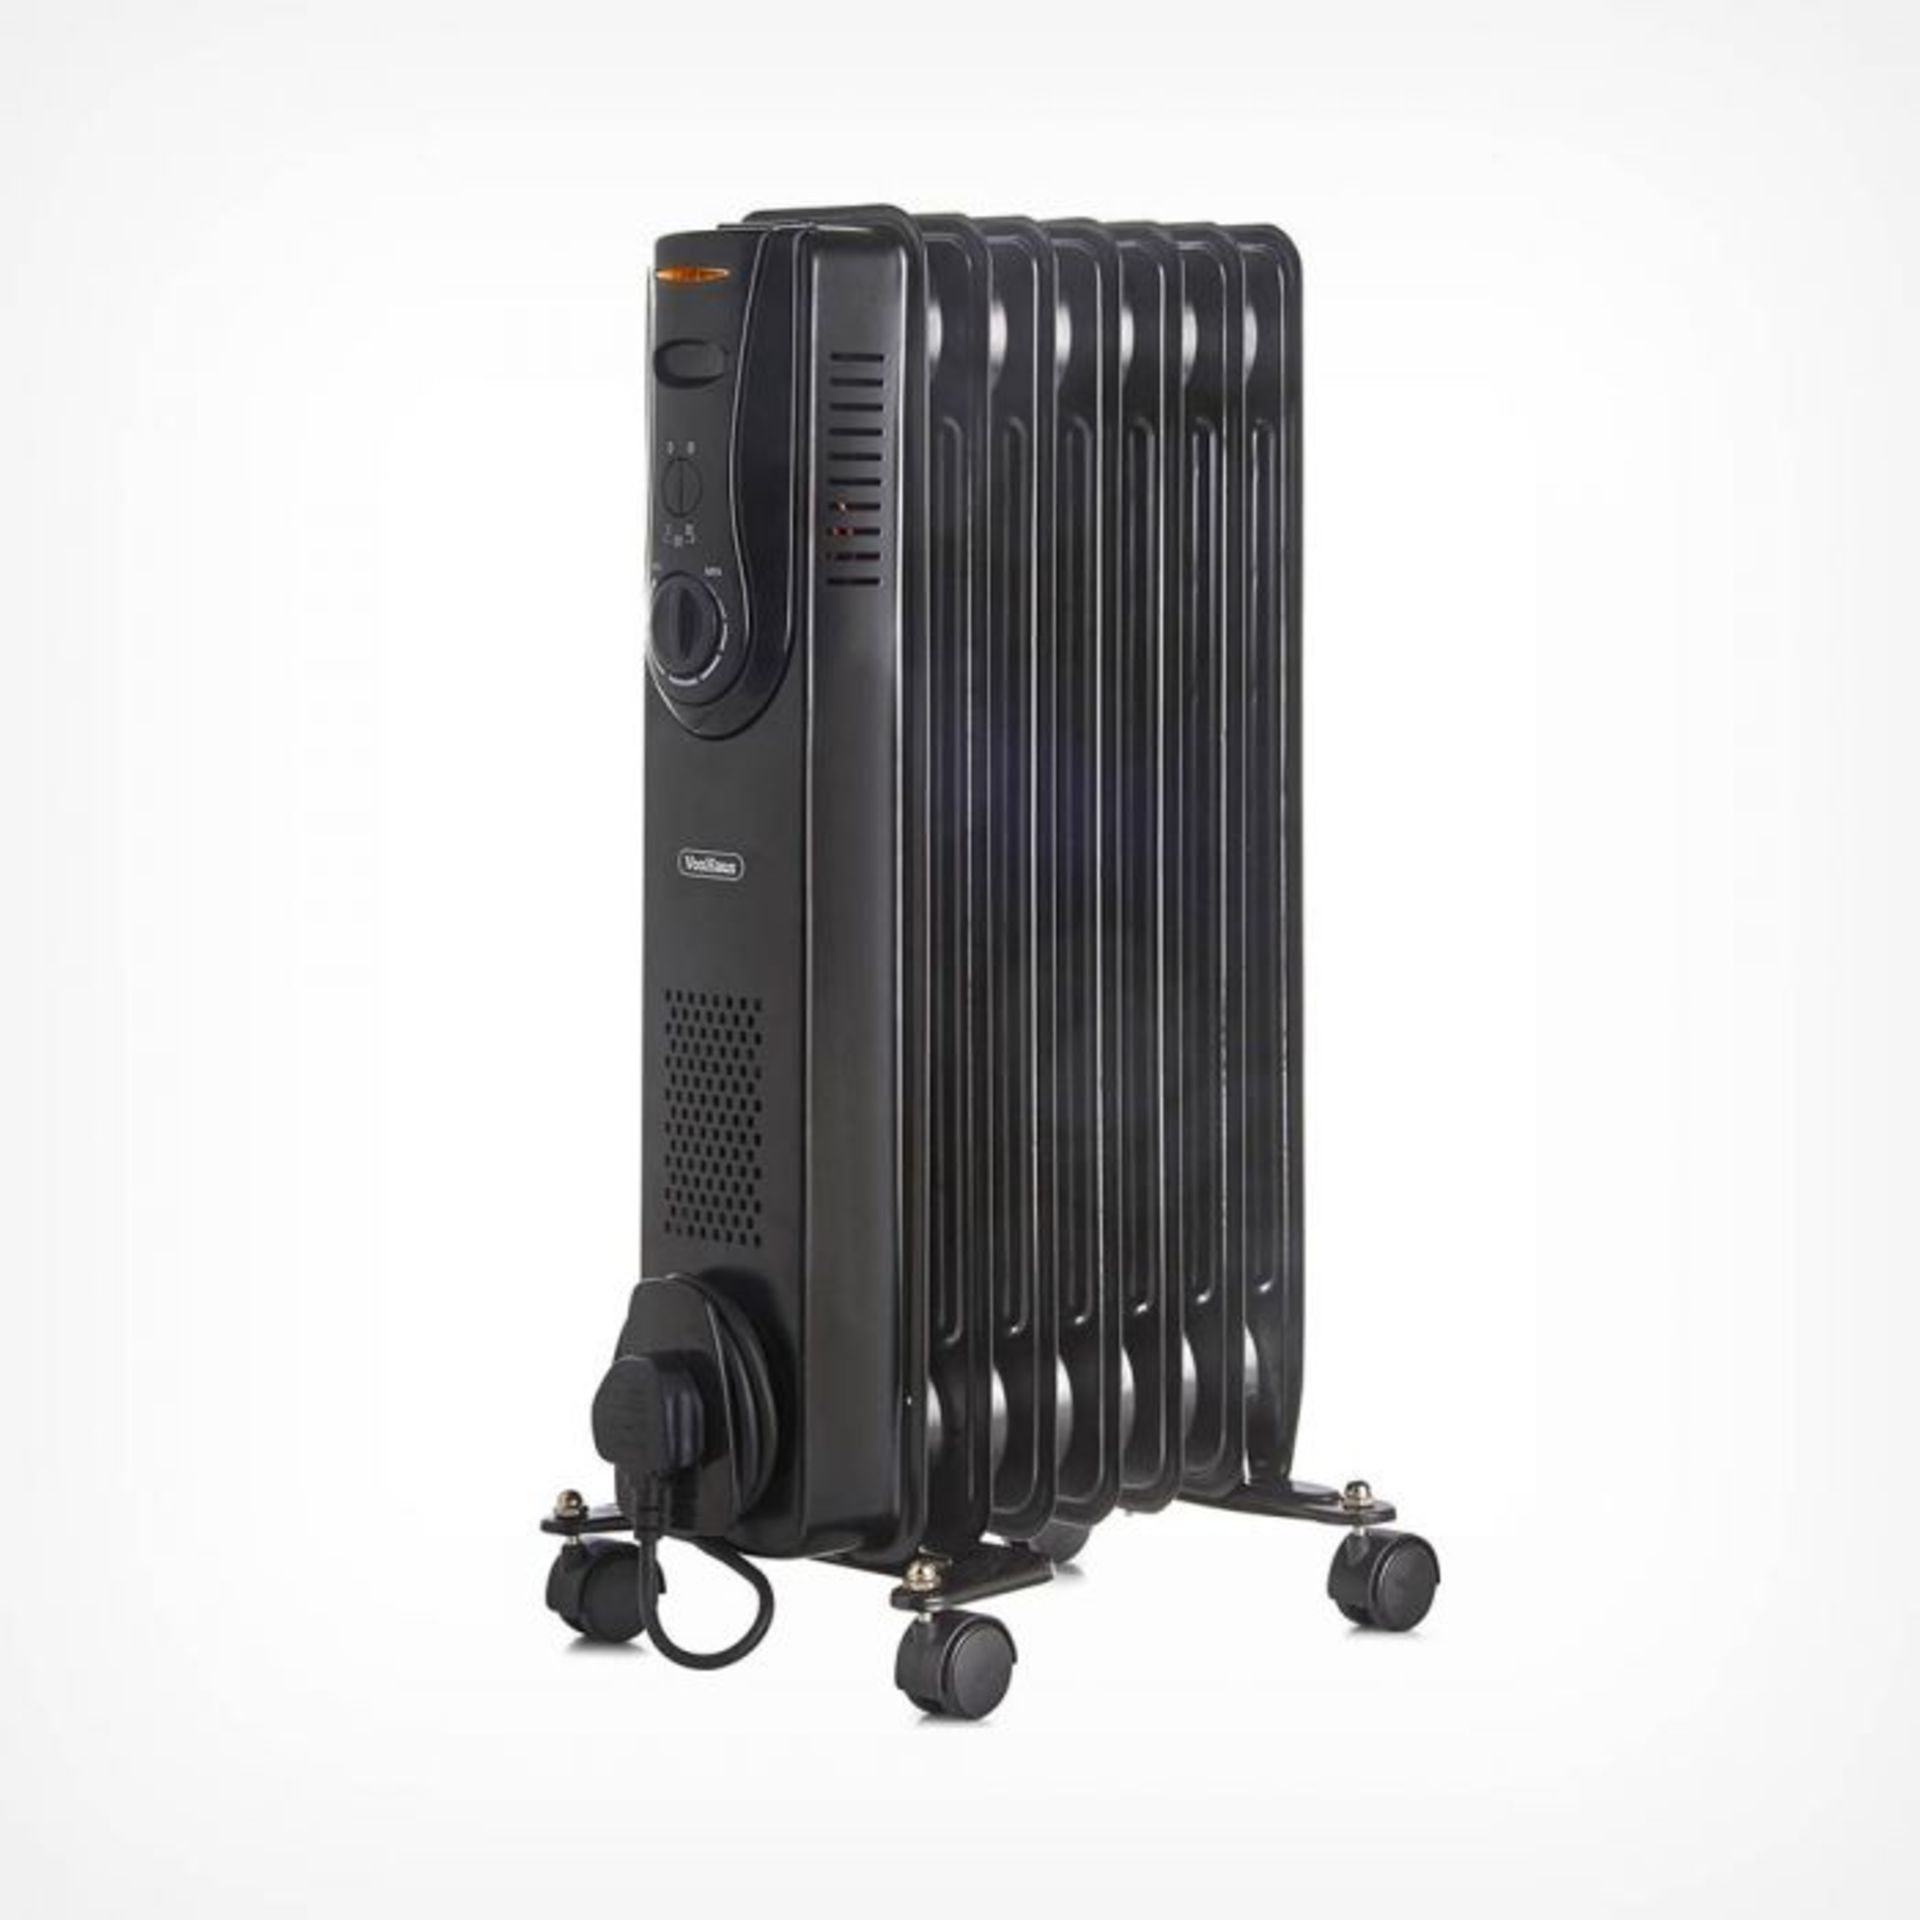 (V130) 7 Fin 1500W Oil Filled Radiator - Black Powerful 1500W radiator with 7 oil-filled fins ... - Image 2 of 3